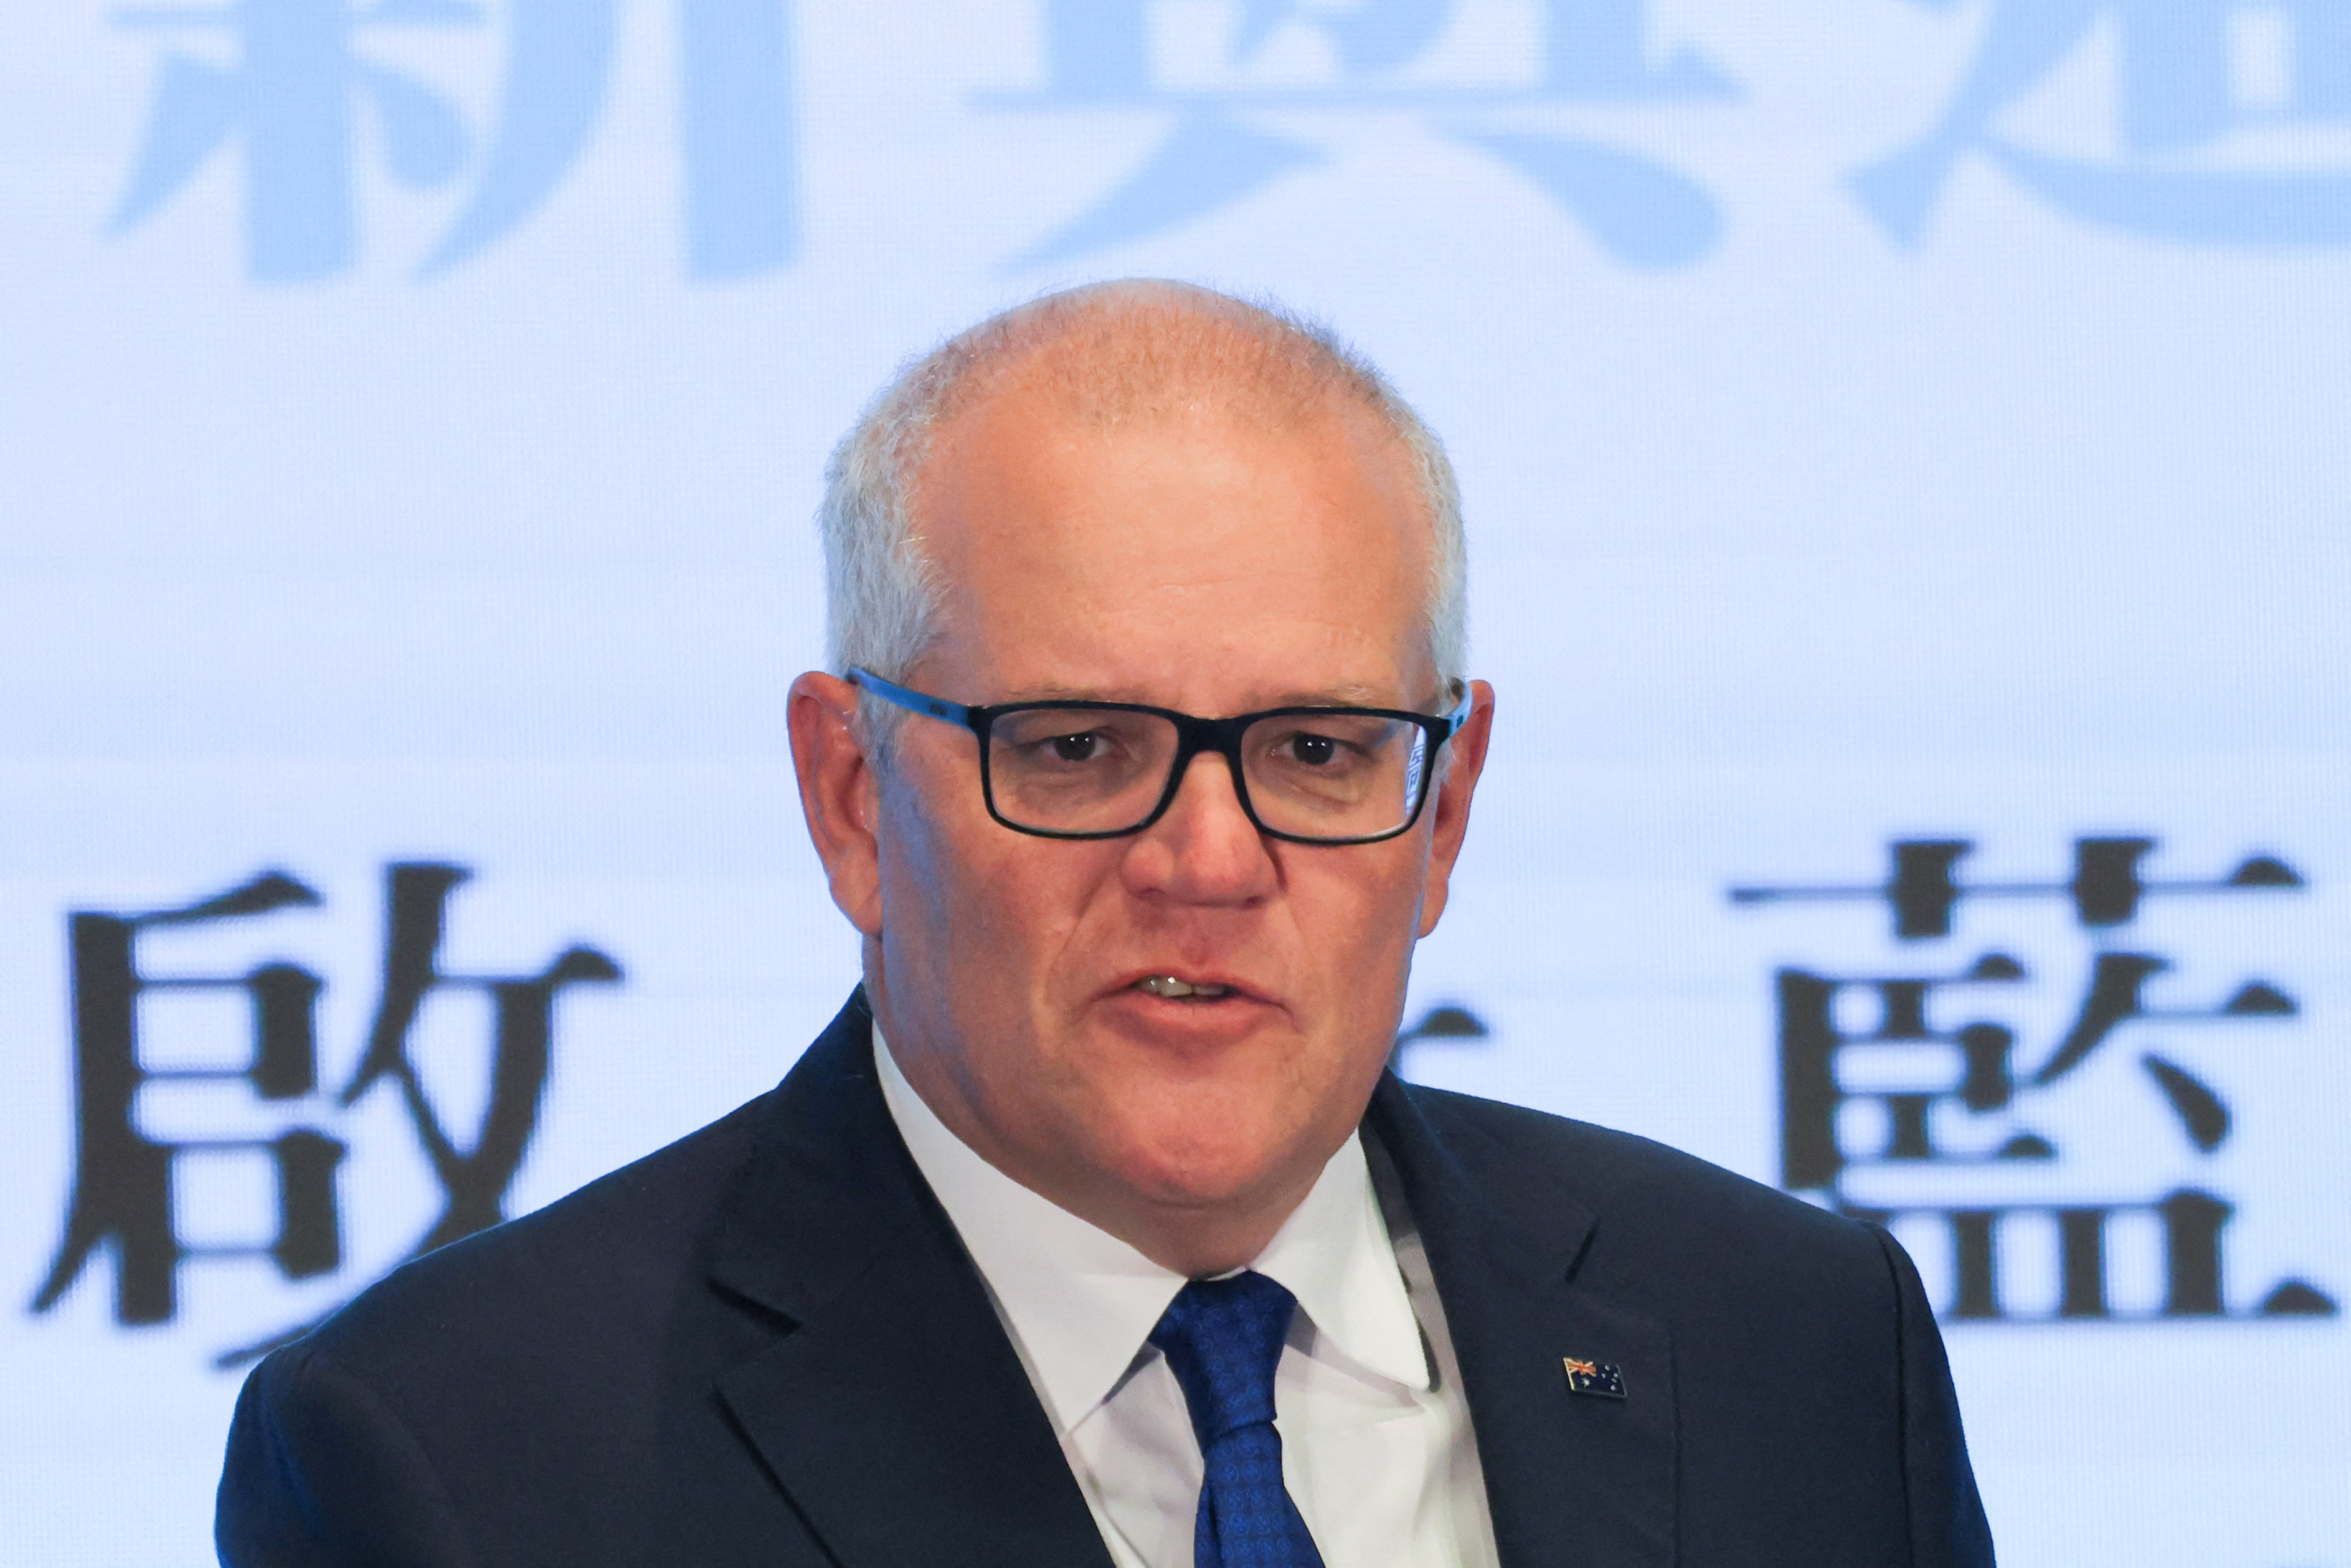 Former Australian Prime Minister Scott Morrison said Beijing was also a concern when he decided to fund defensive weapons for Ukraine after Russia’s invasion. Photo: Reuters